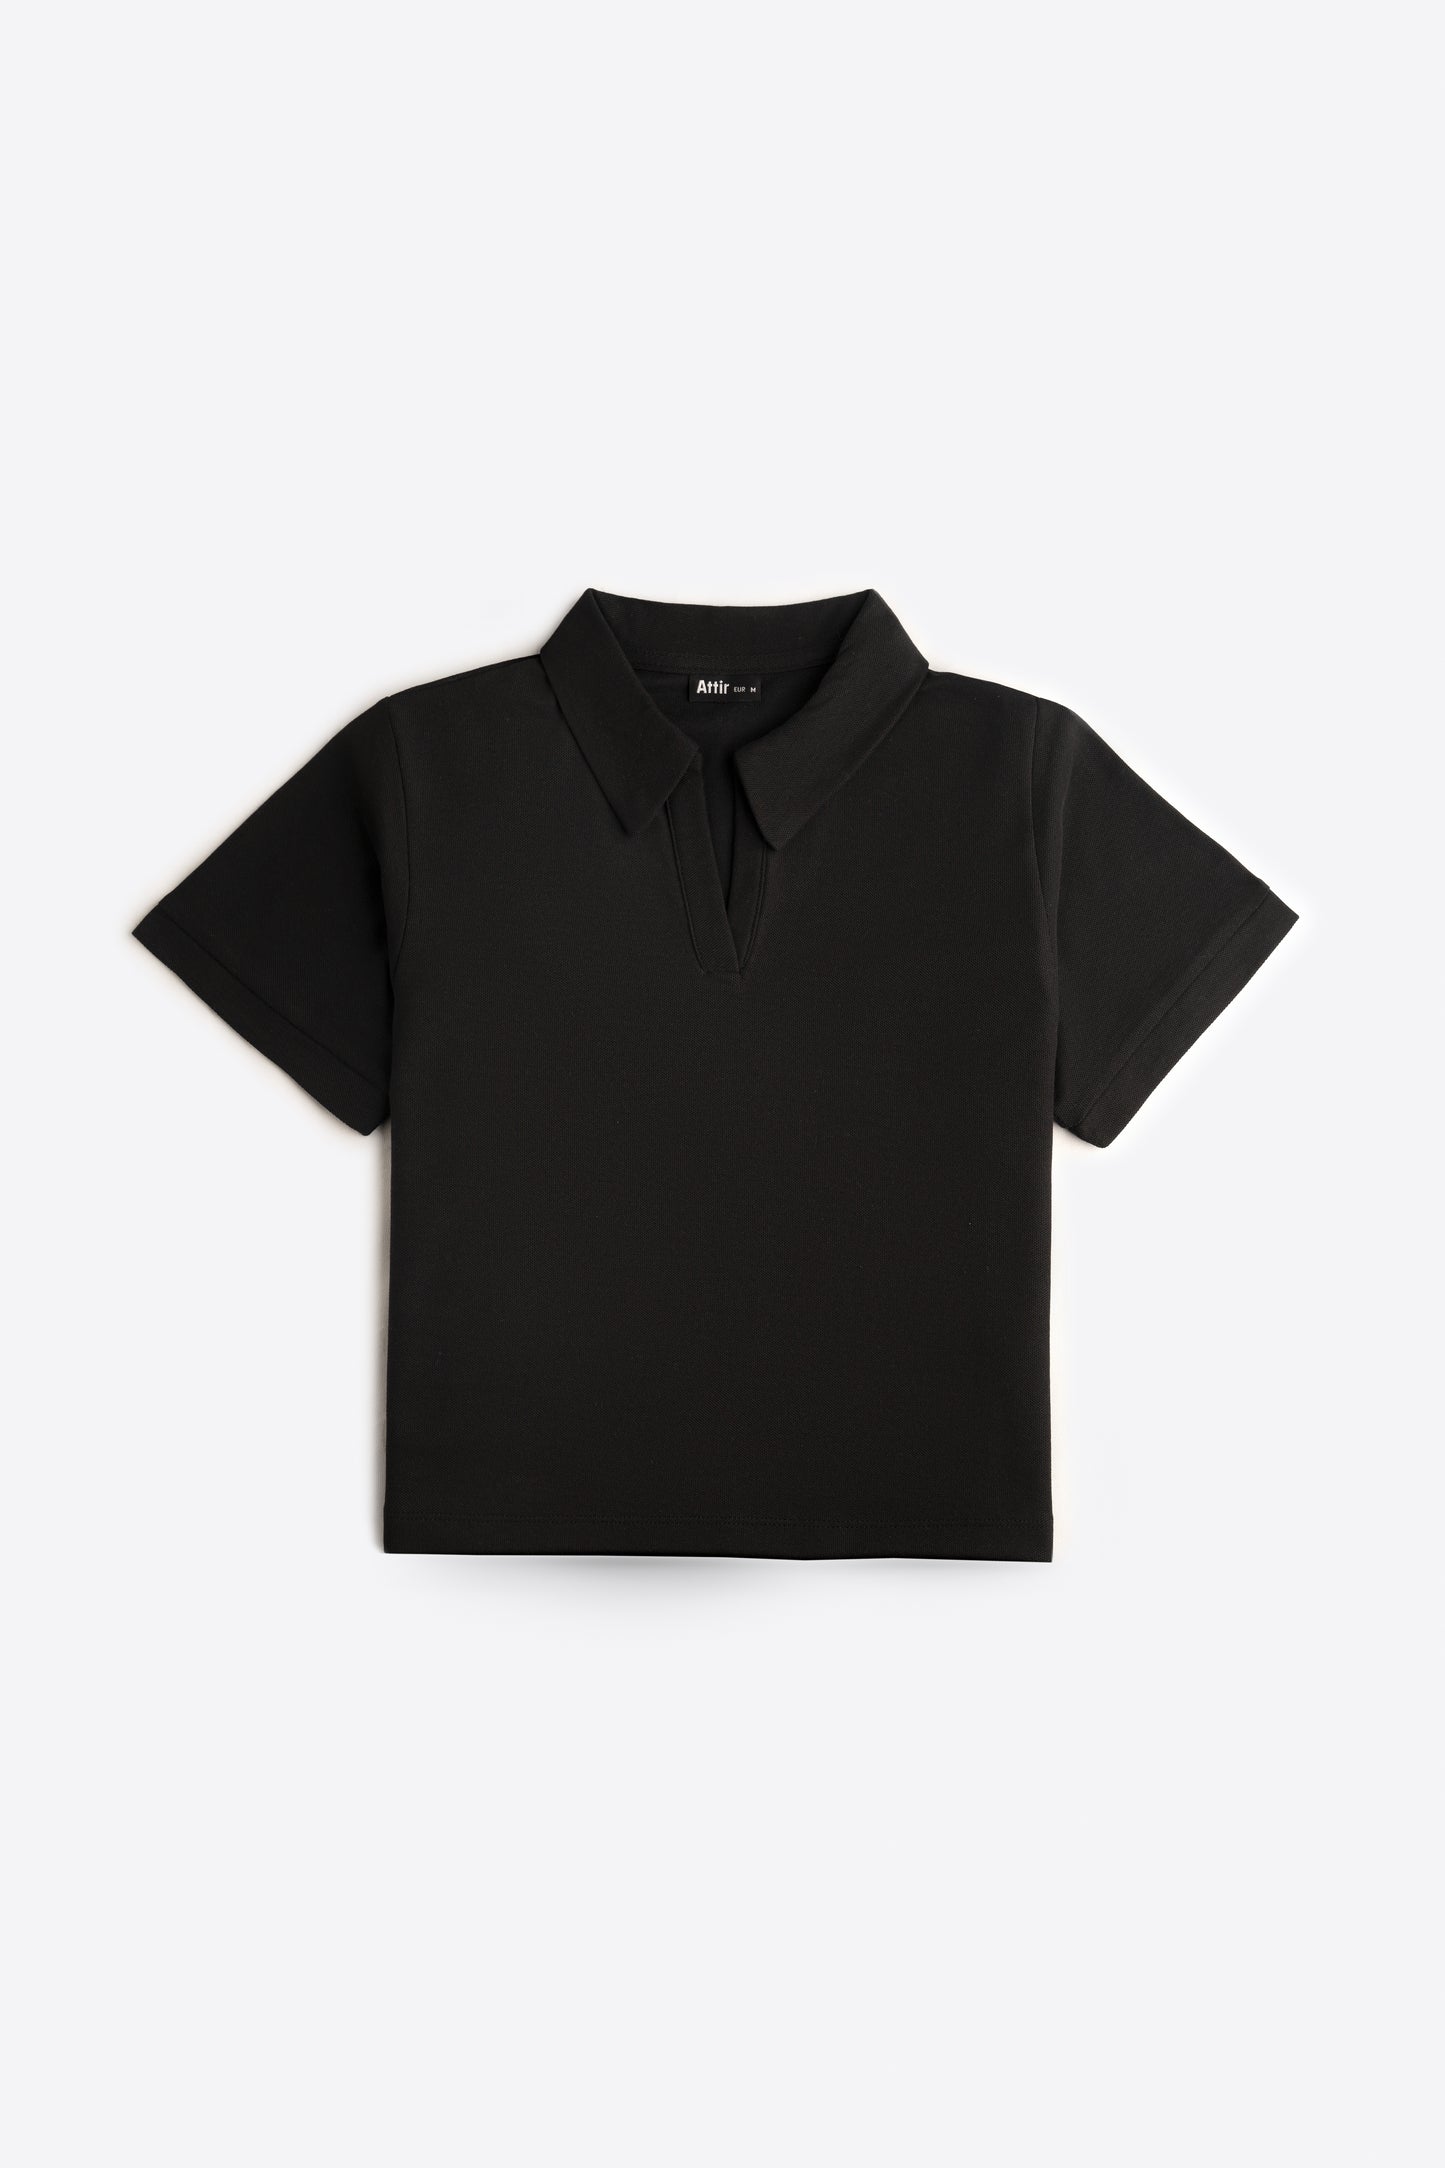 Cropped Polo Top in Ink Black